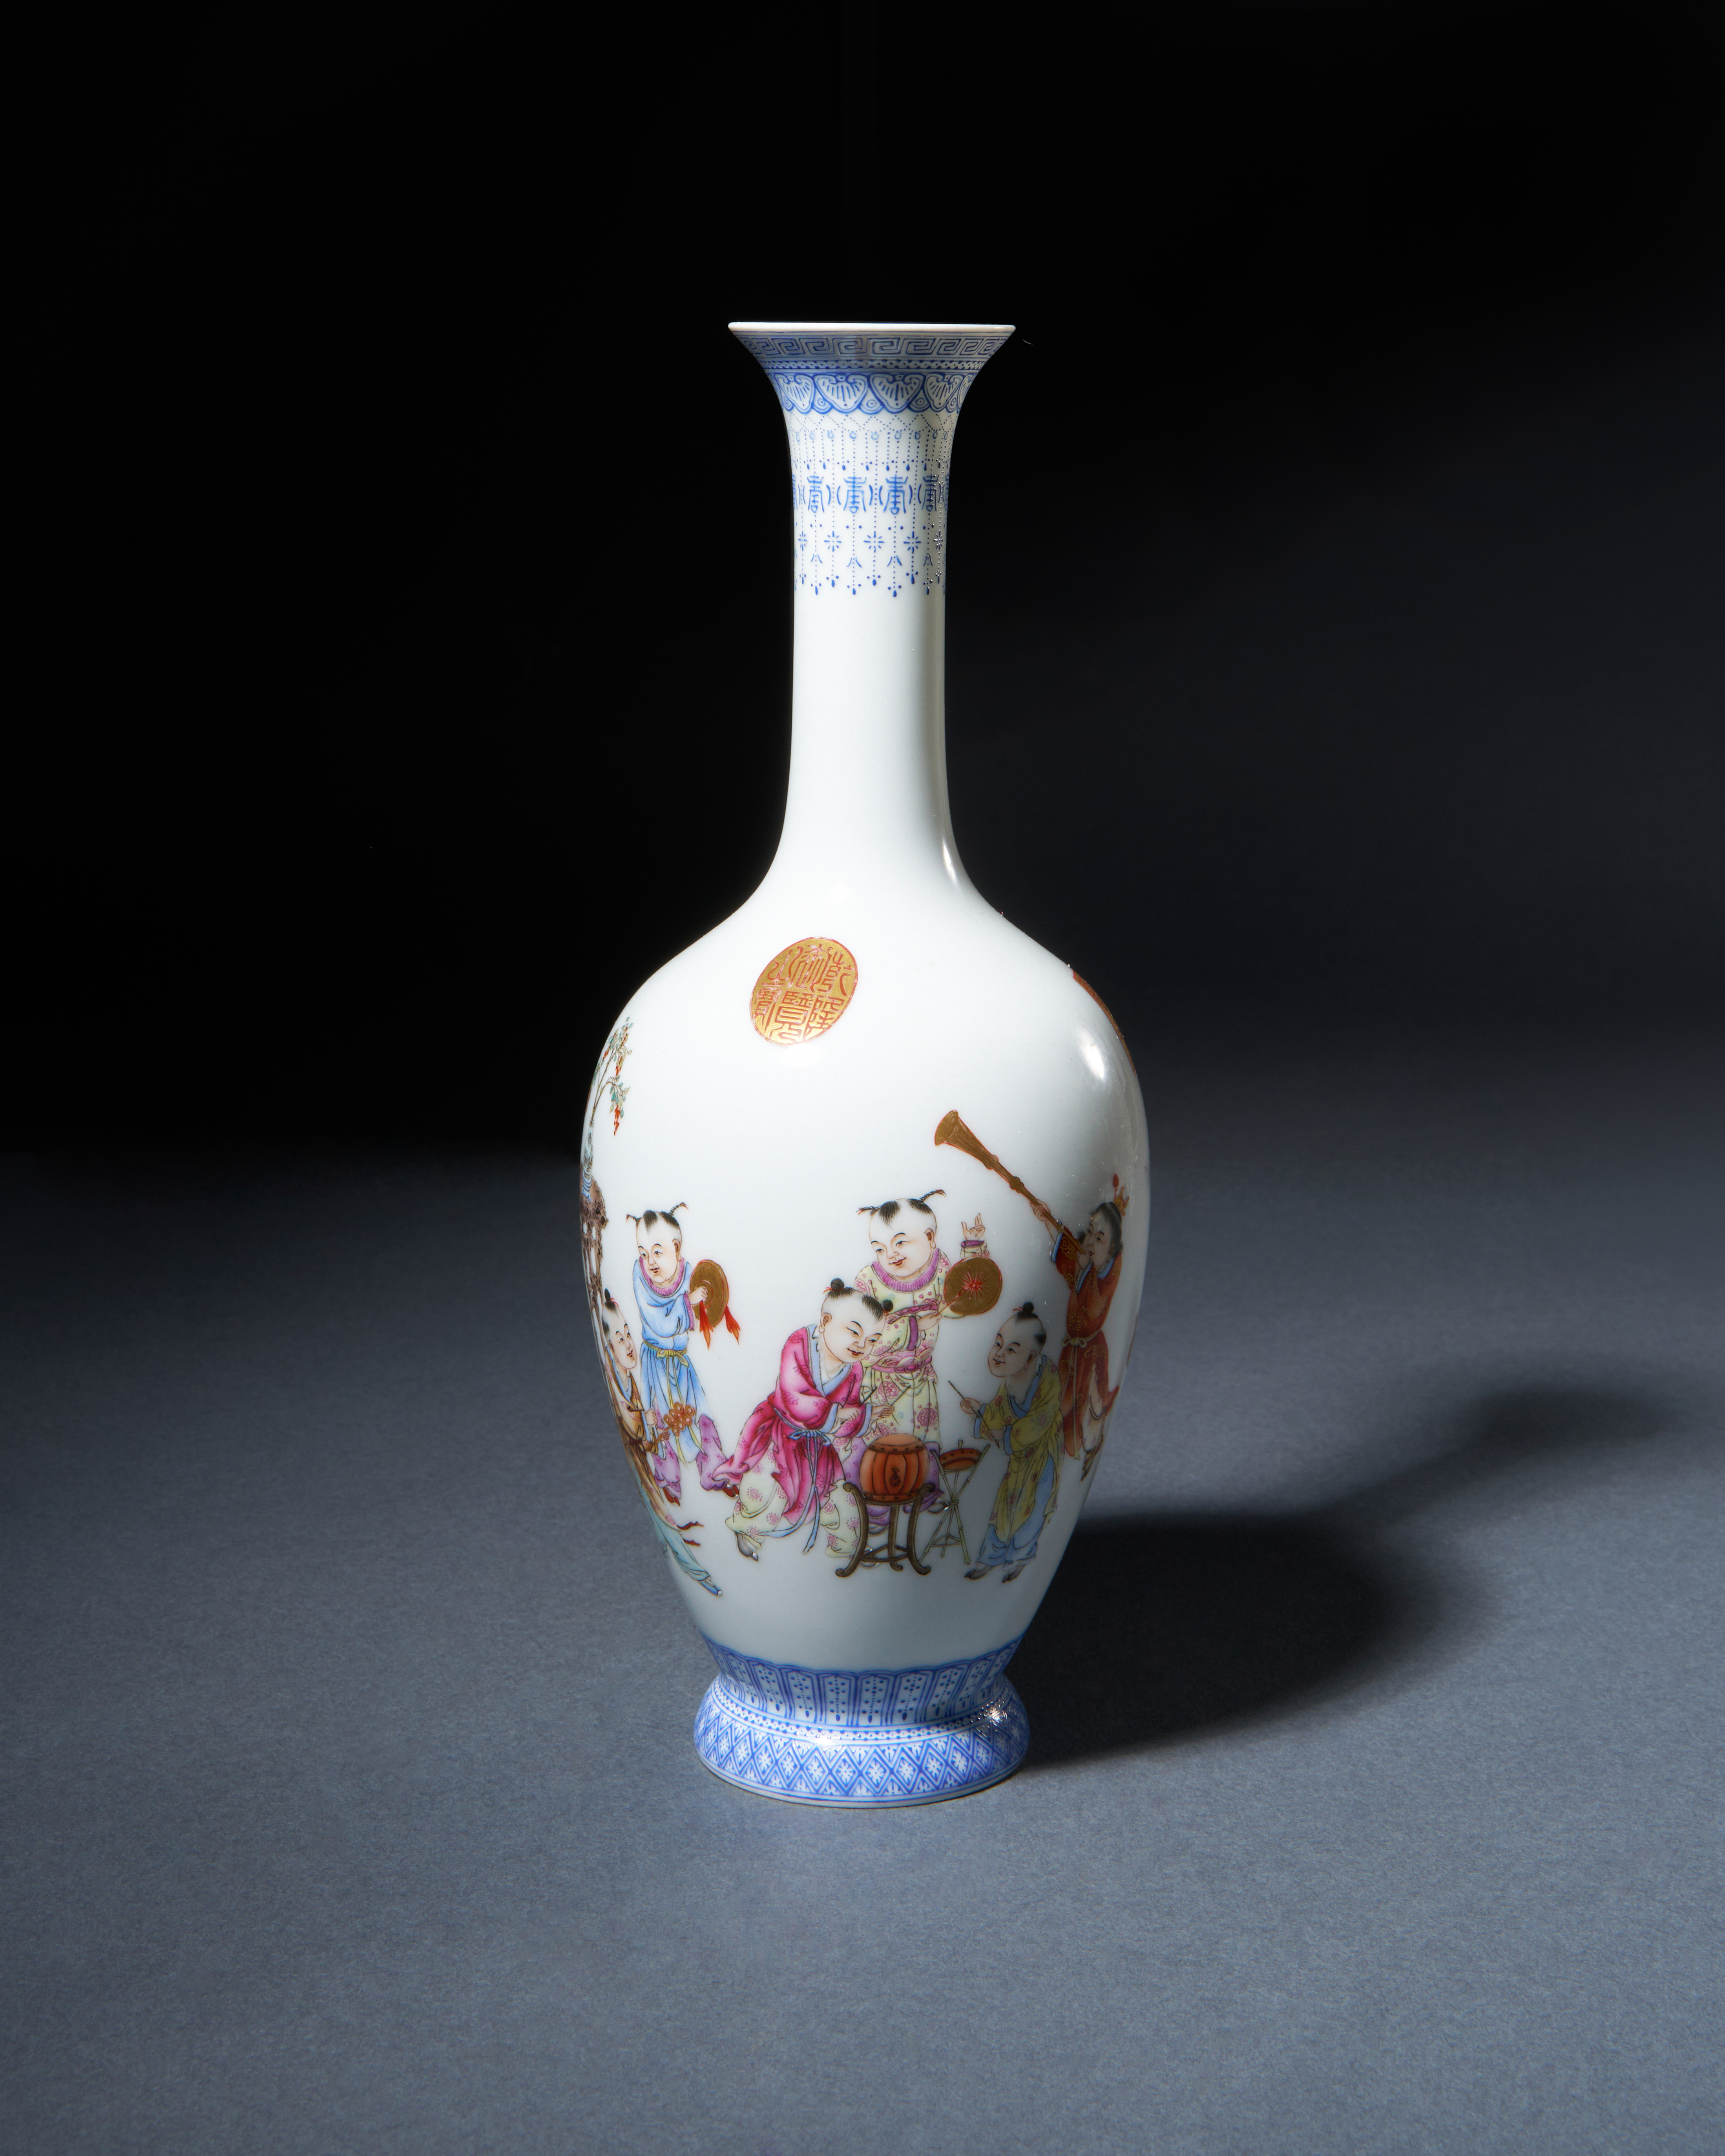 A FINE CHINESE FAMILLE ROSE VASE, QING DYNASTY OR EARLY REPUBLIC